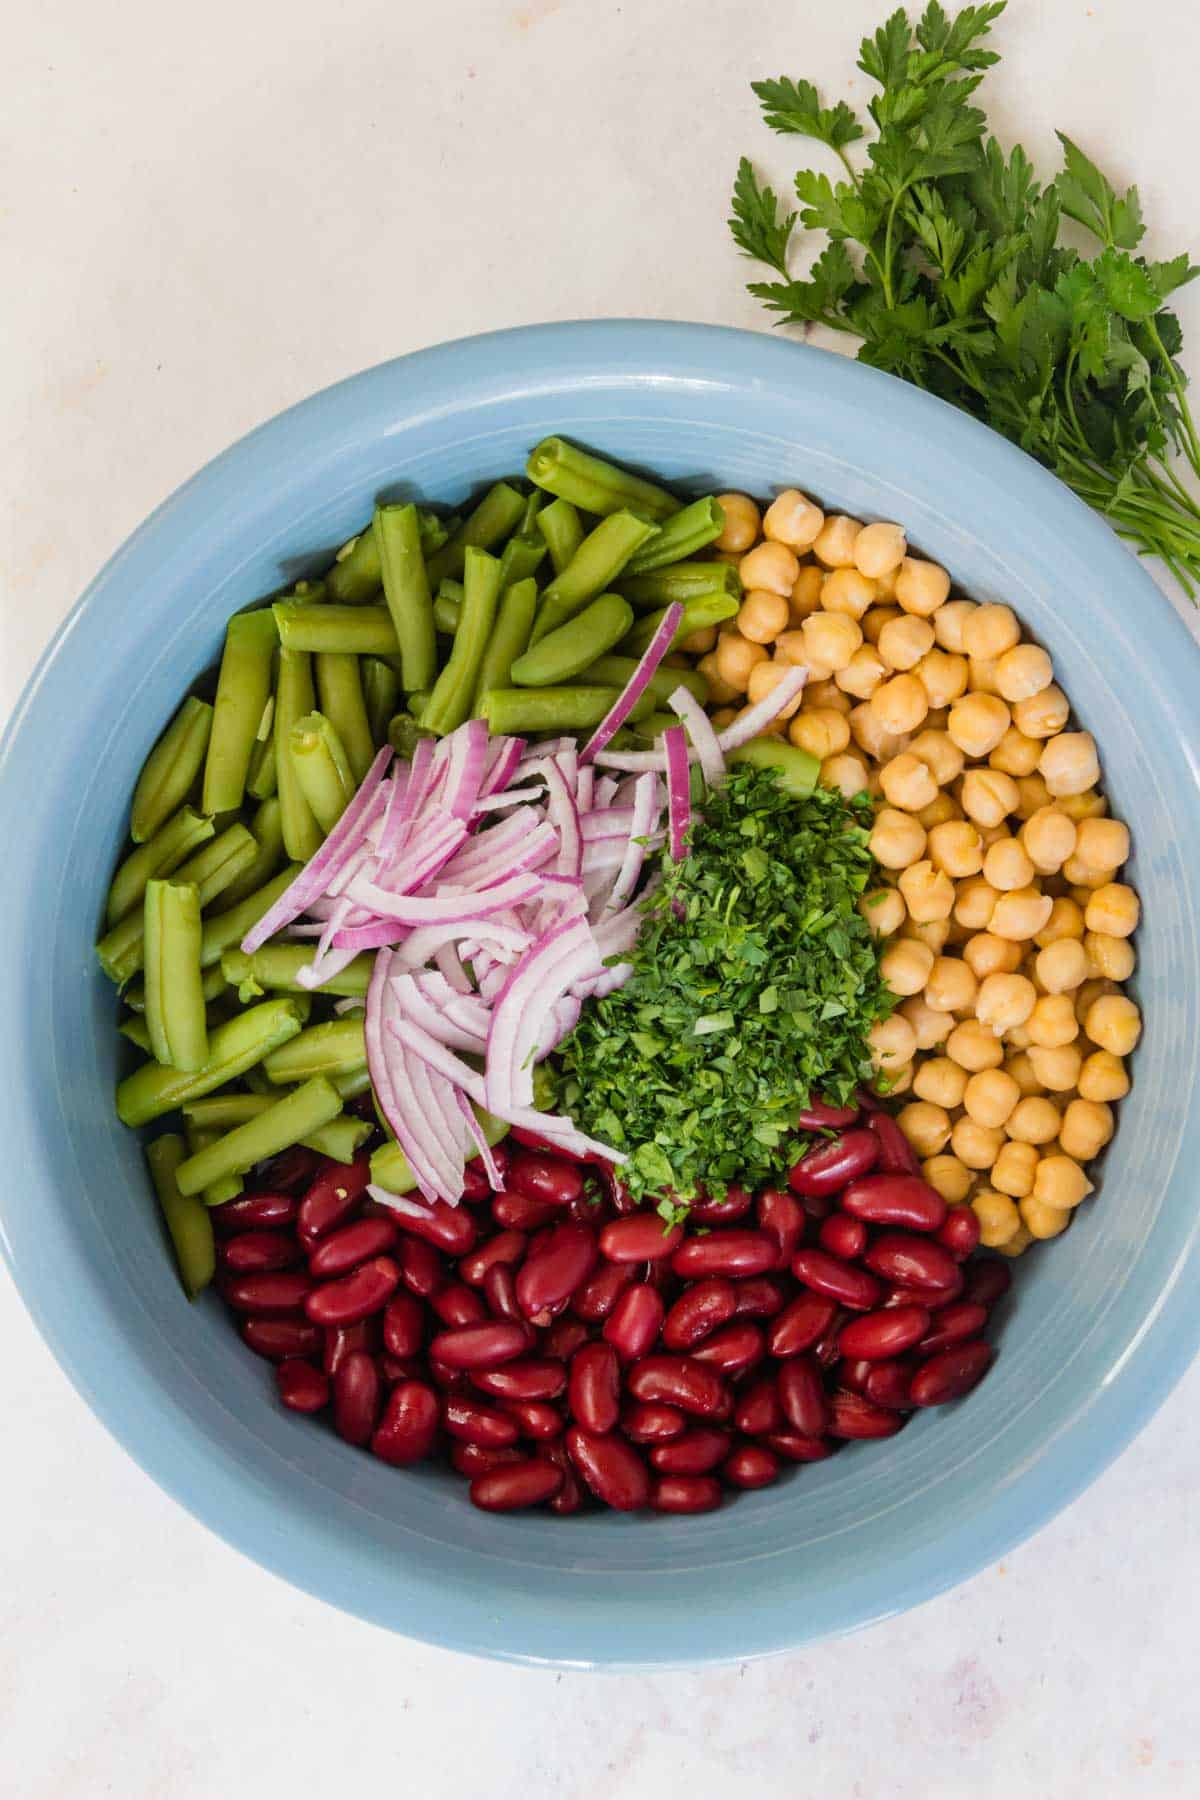 Beans, red onion, chickpeas, and parsley combined in a blue salad bowl.